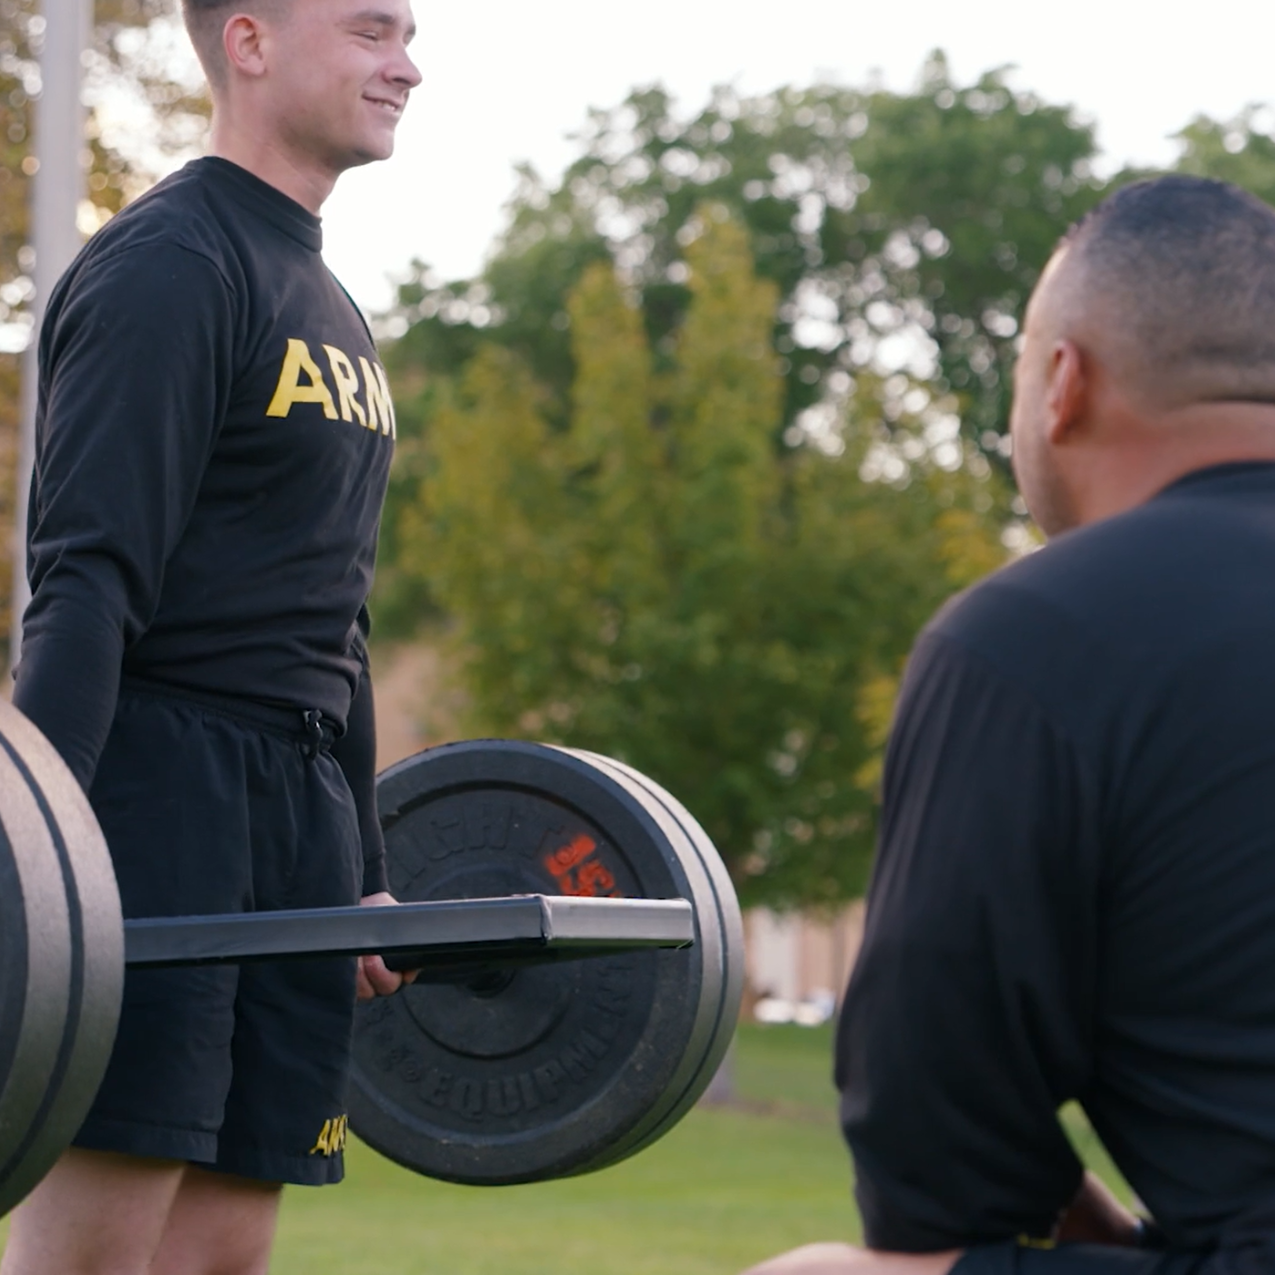 A cadet wearing a black Army sweatshirt deadlifts weights on a barbell. A leader kneels in front of him, looking on.